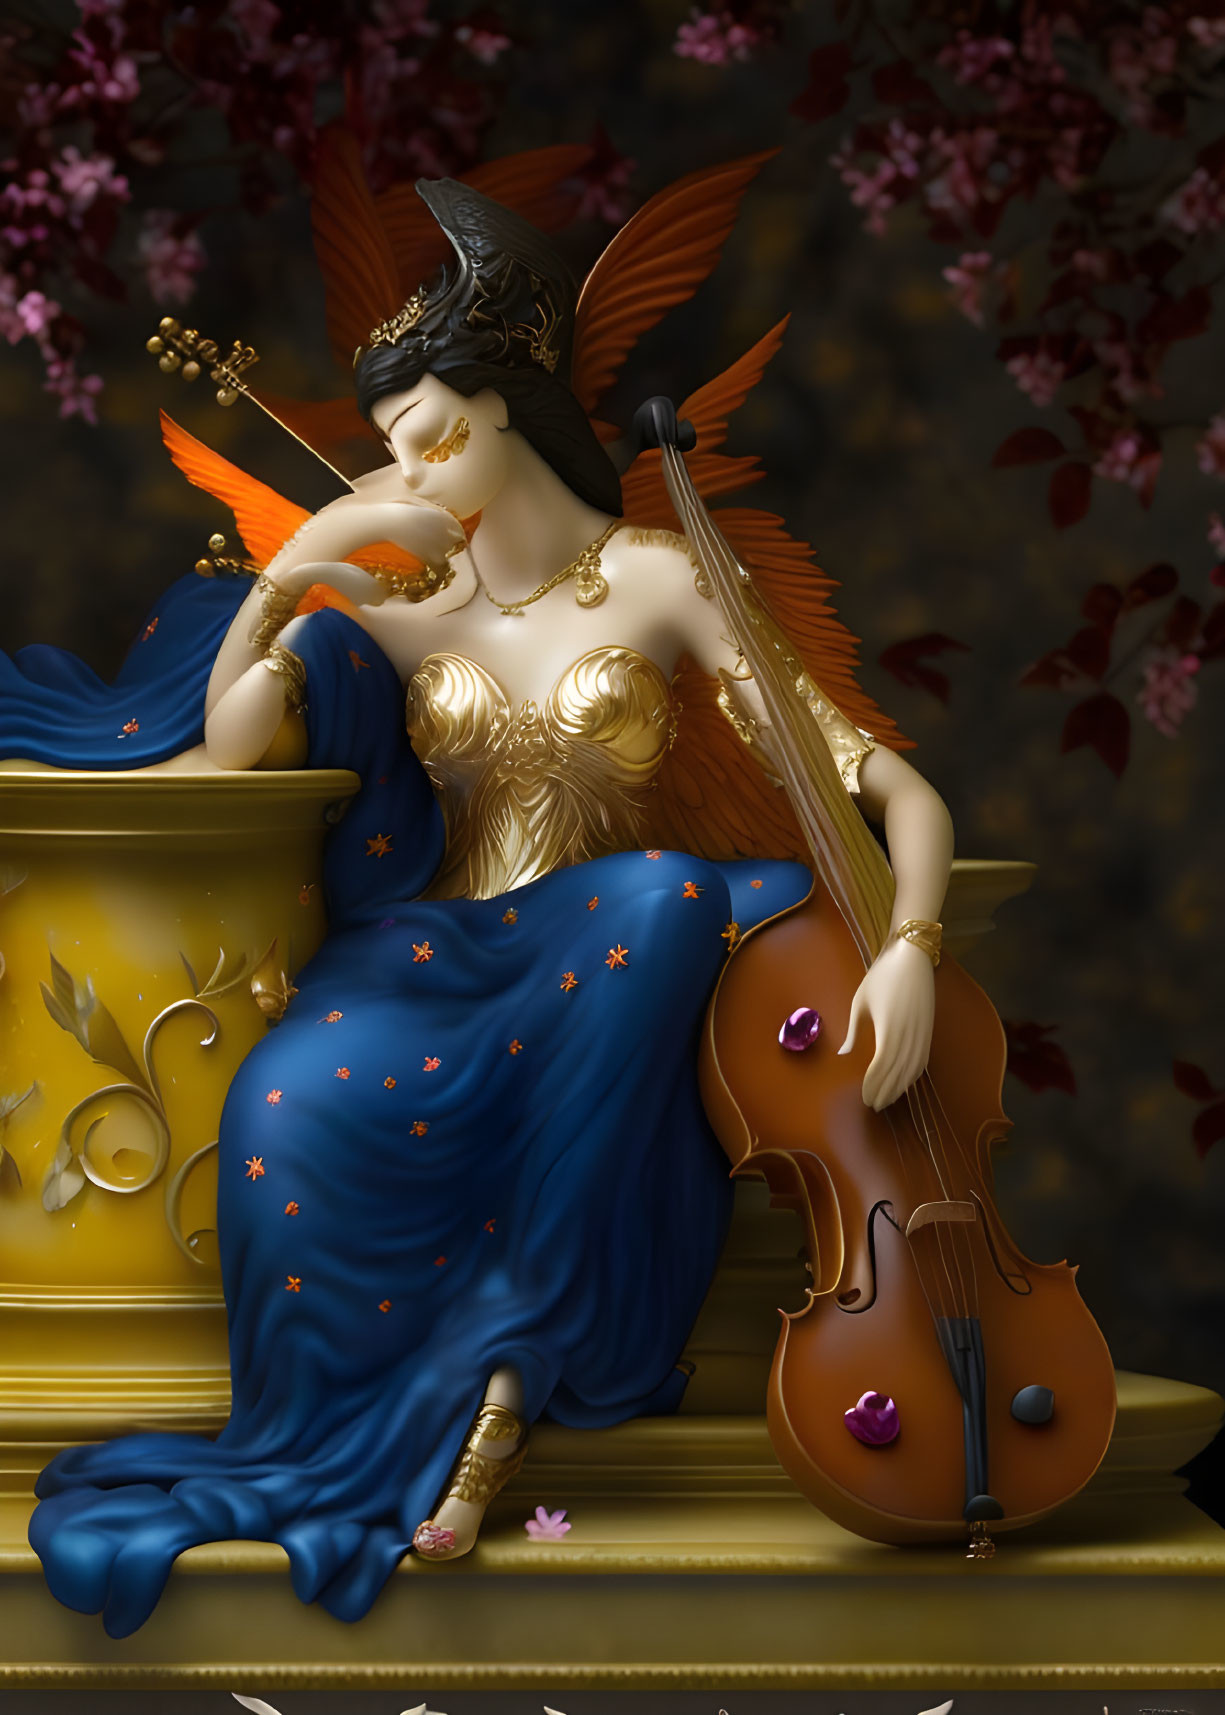 Surreal figure with butterfly wings playing cello in blue gown among cherry blossoms